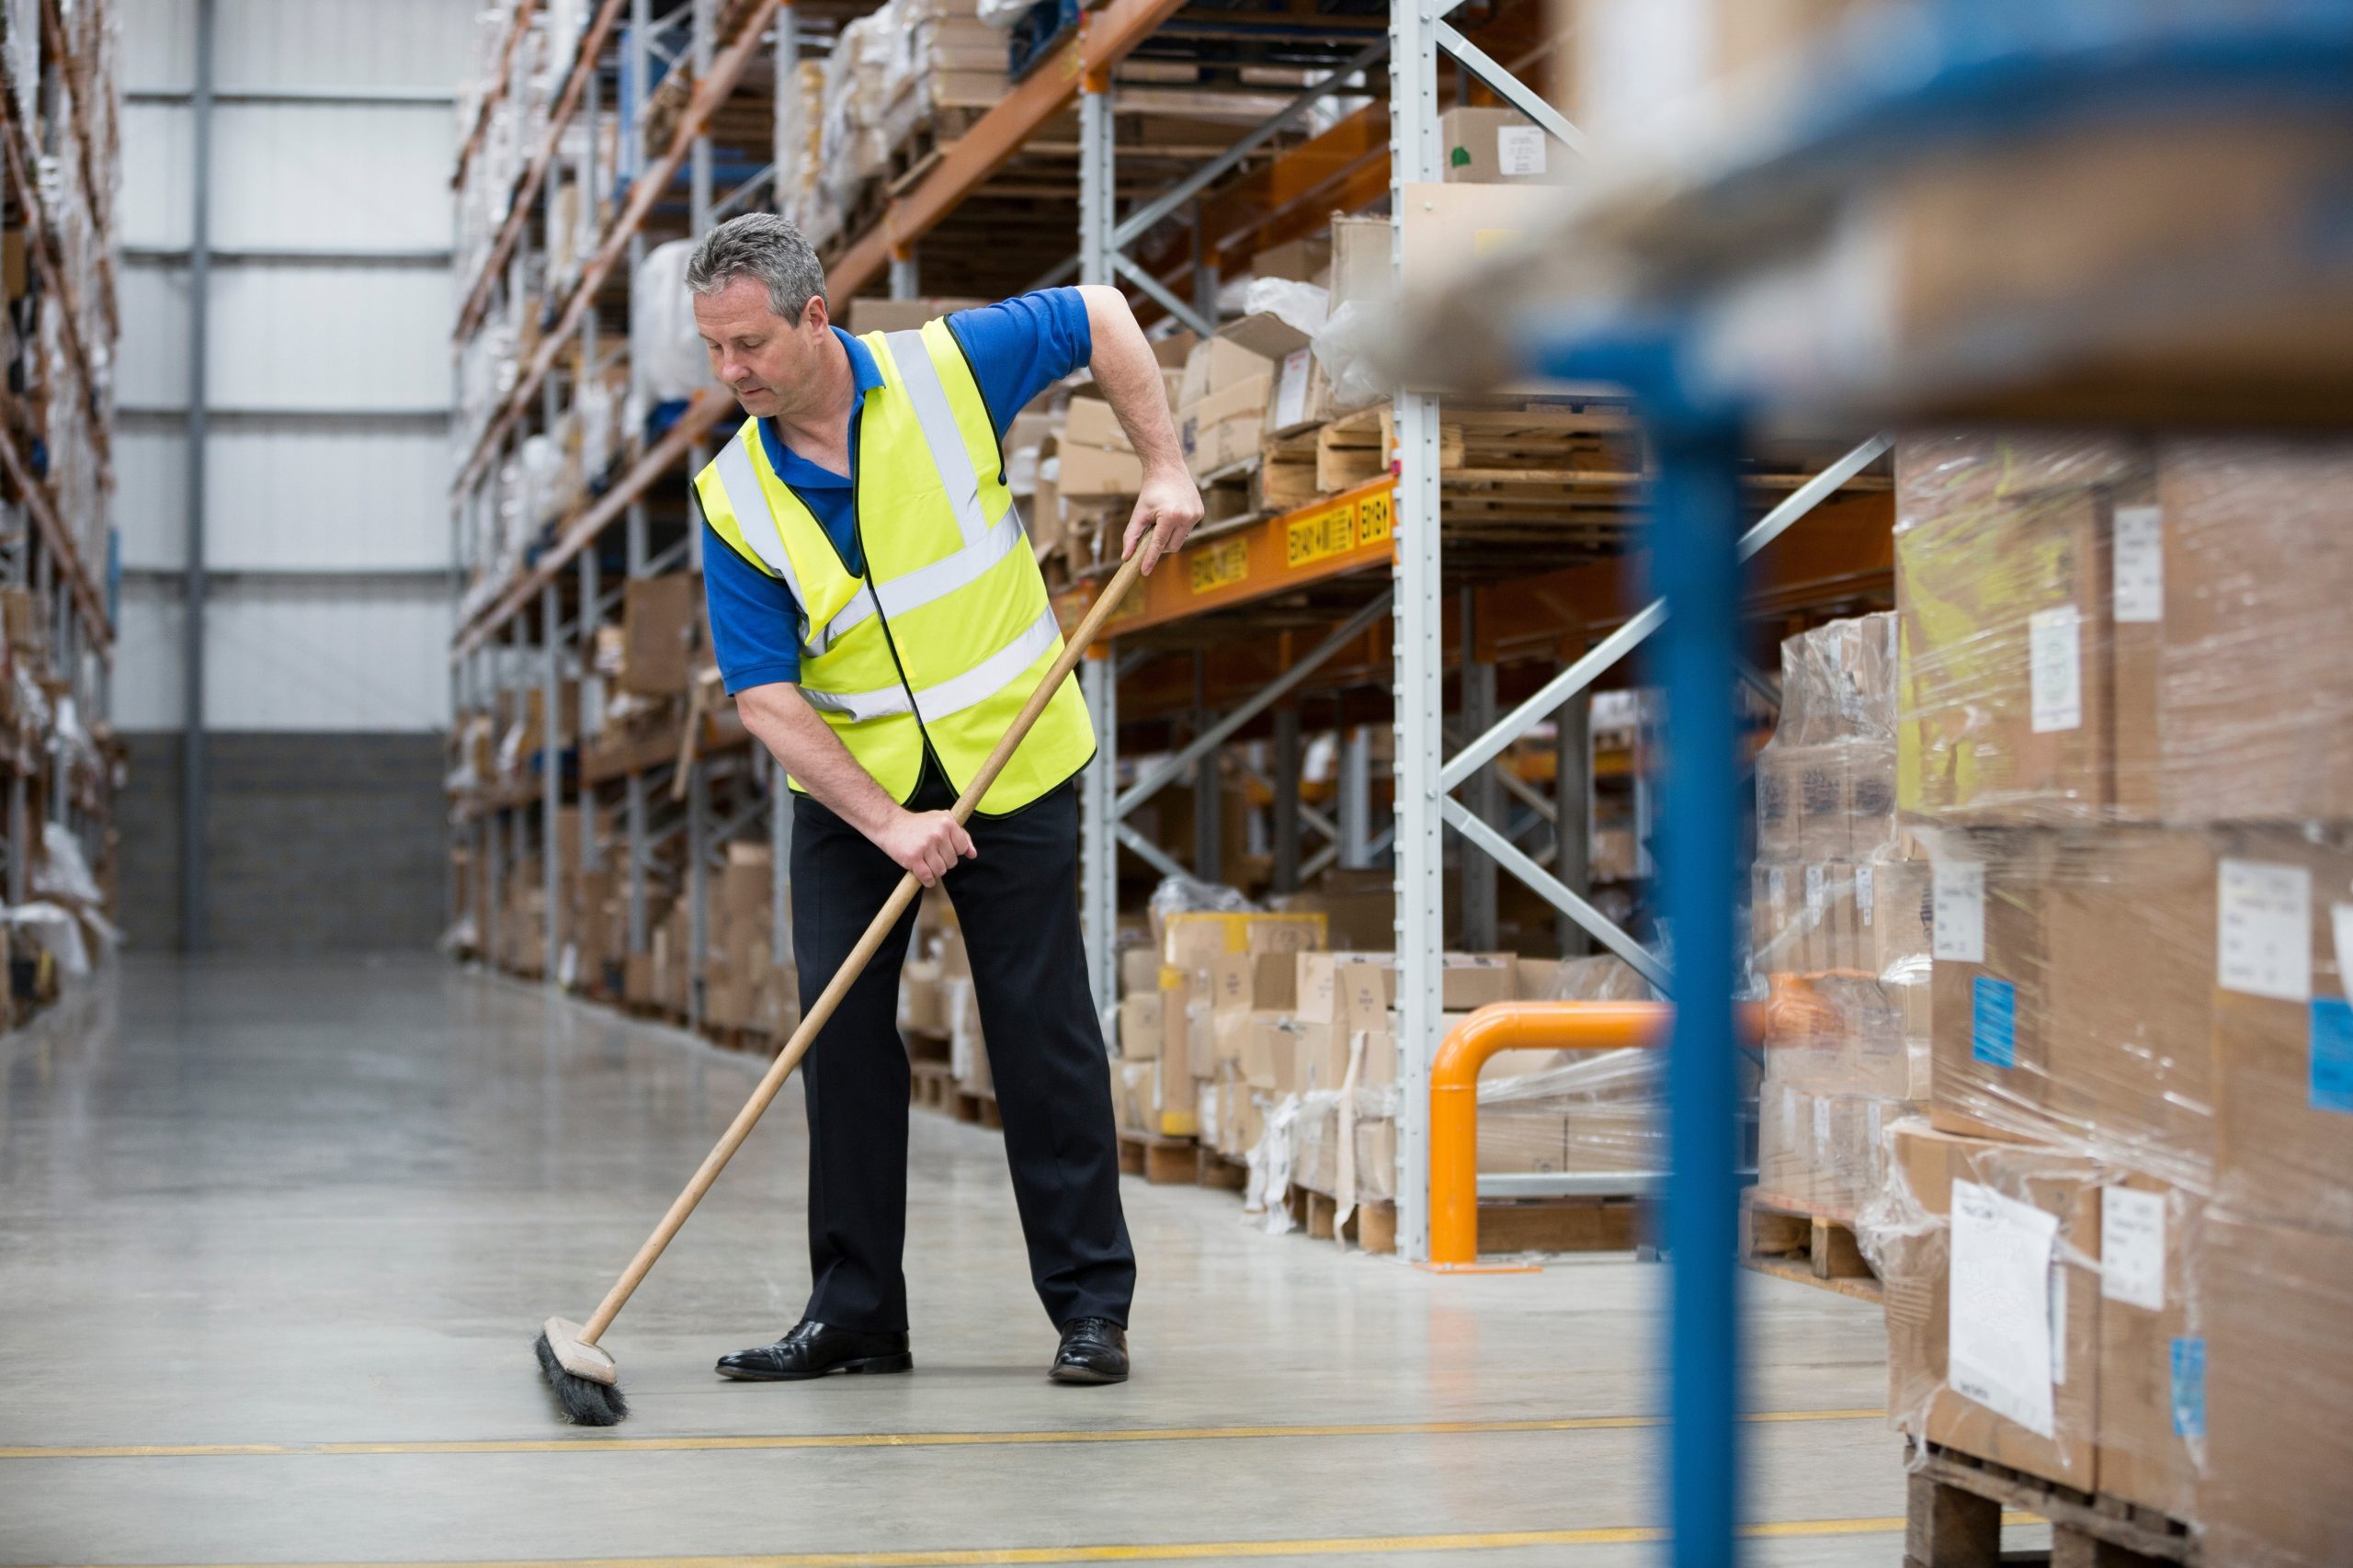 Warehouse Cleaning for Efficiency and Safety